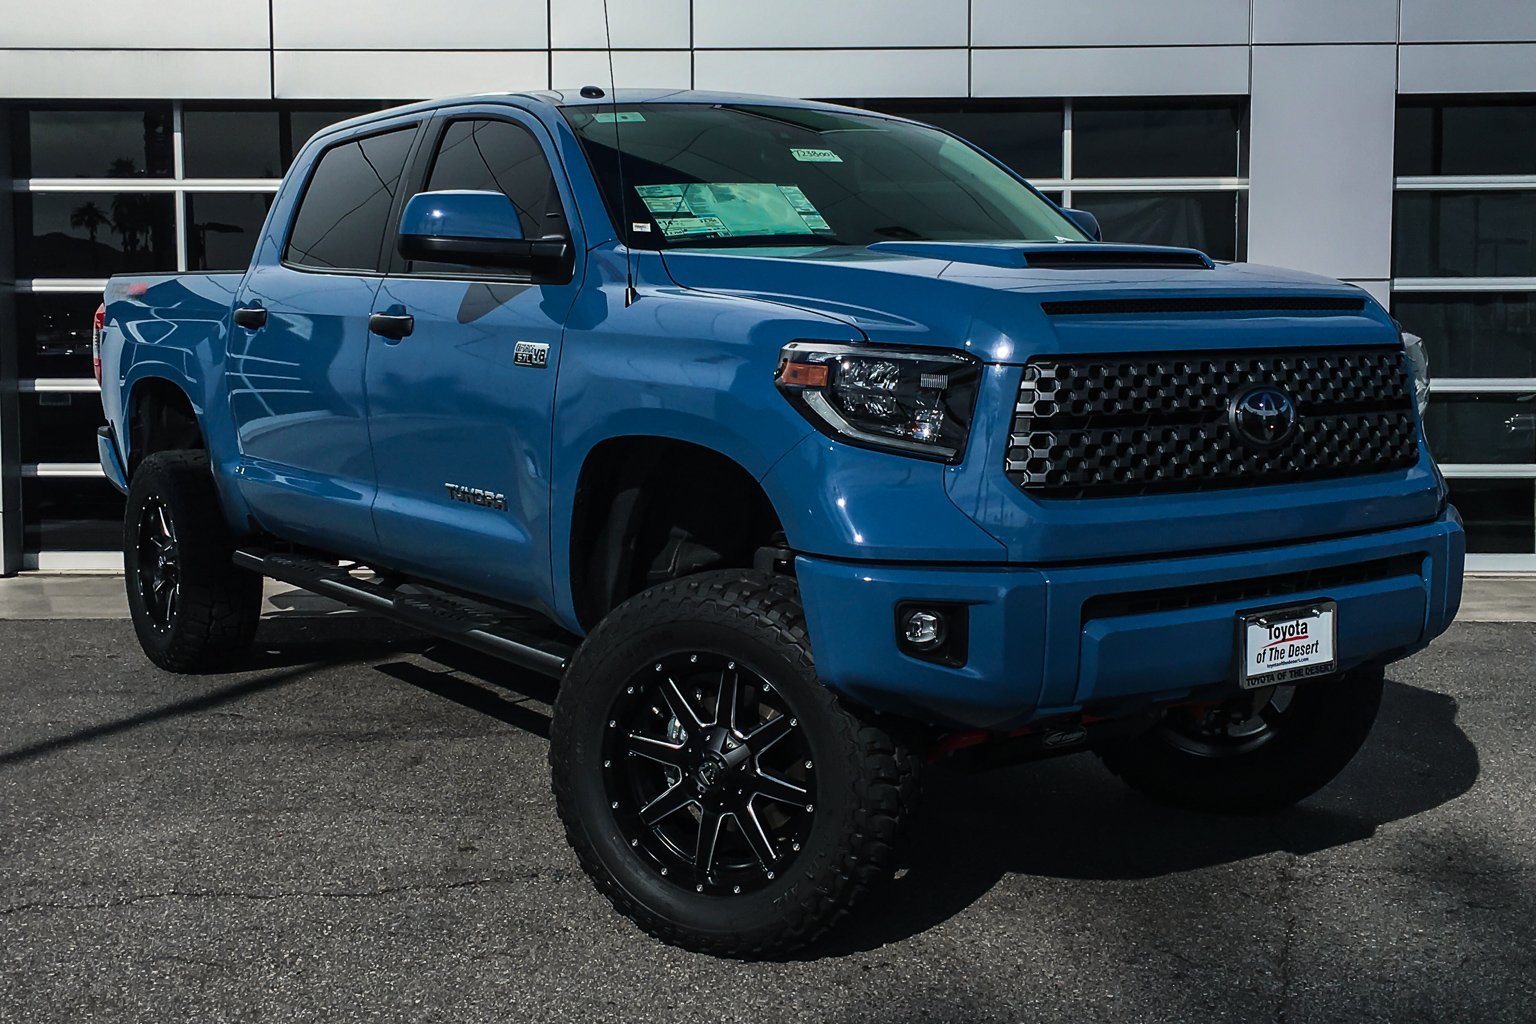 New 2019 Toyota Tundra 4WD SR5 Crew Cab Pickup in Cathedral City #